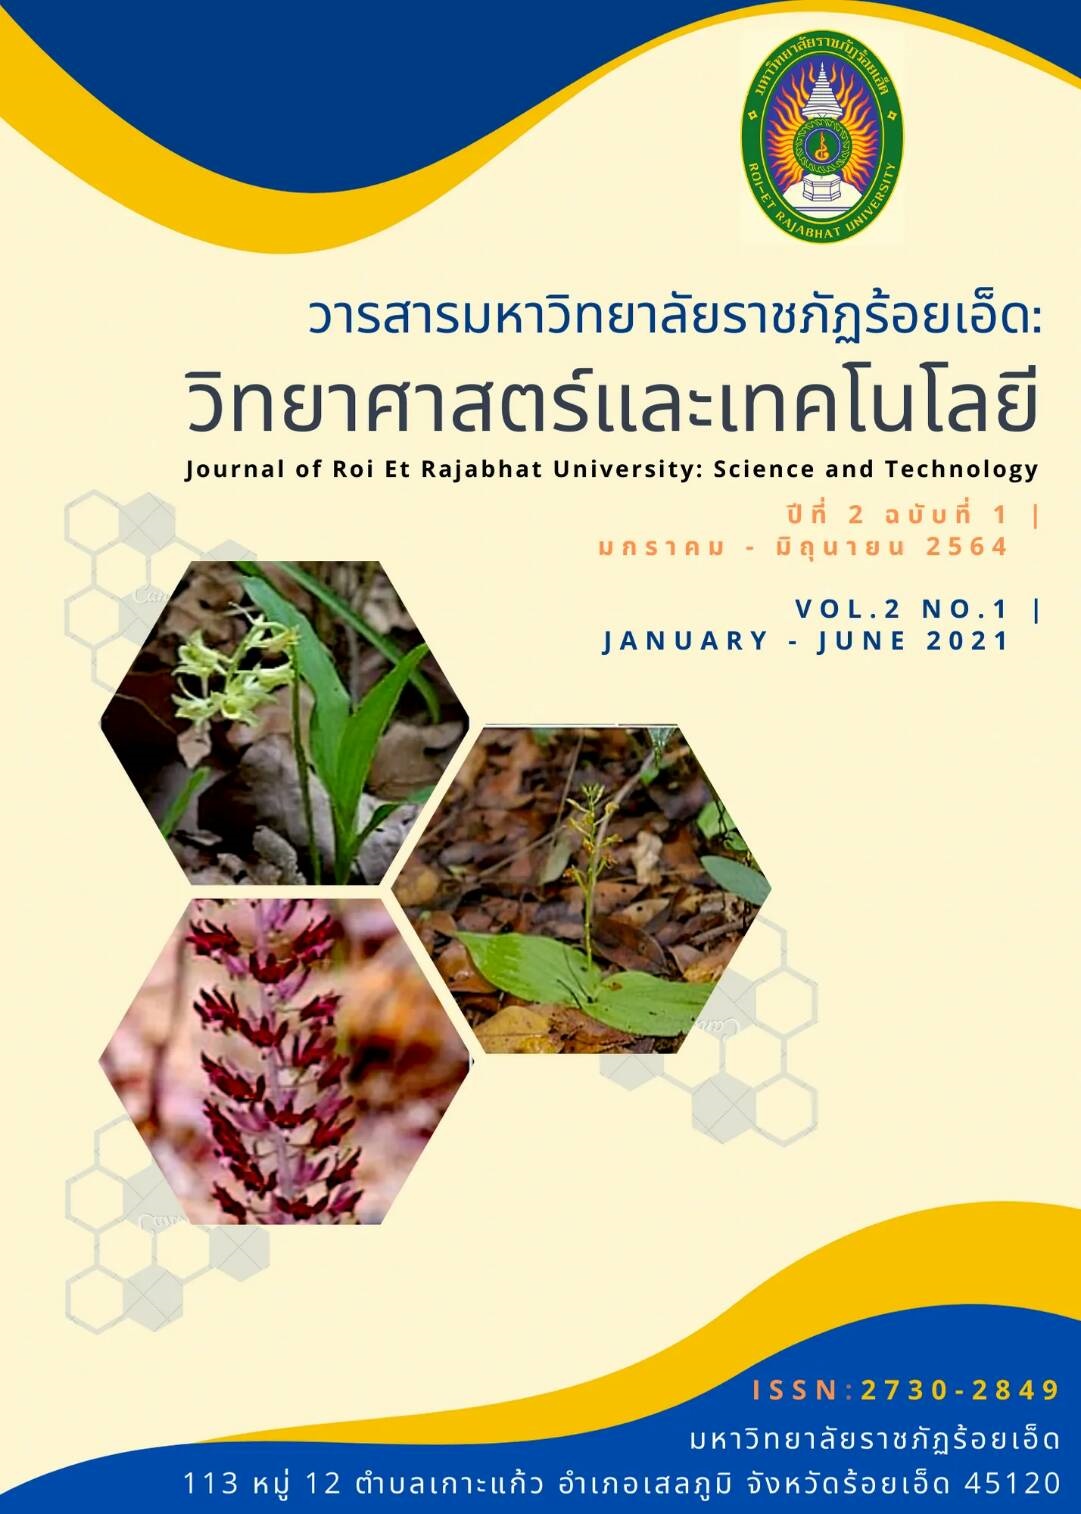 					View Vol. 2 No. 1 (2021): Journal of Roi Et Rajabhat University : Science and Technology
				